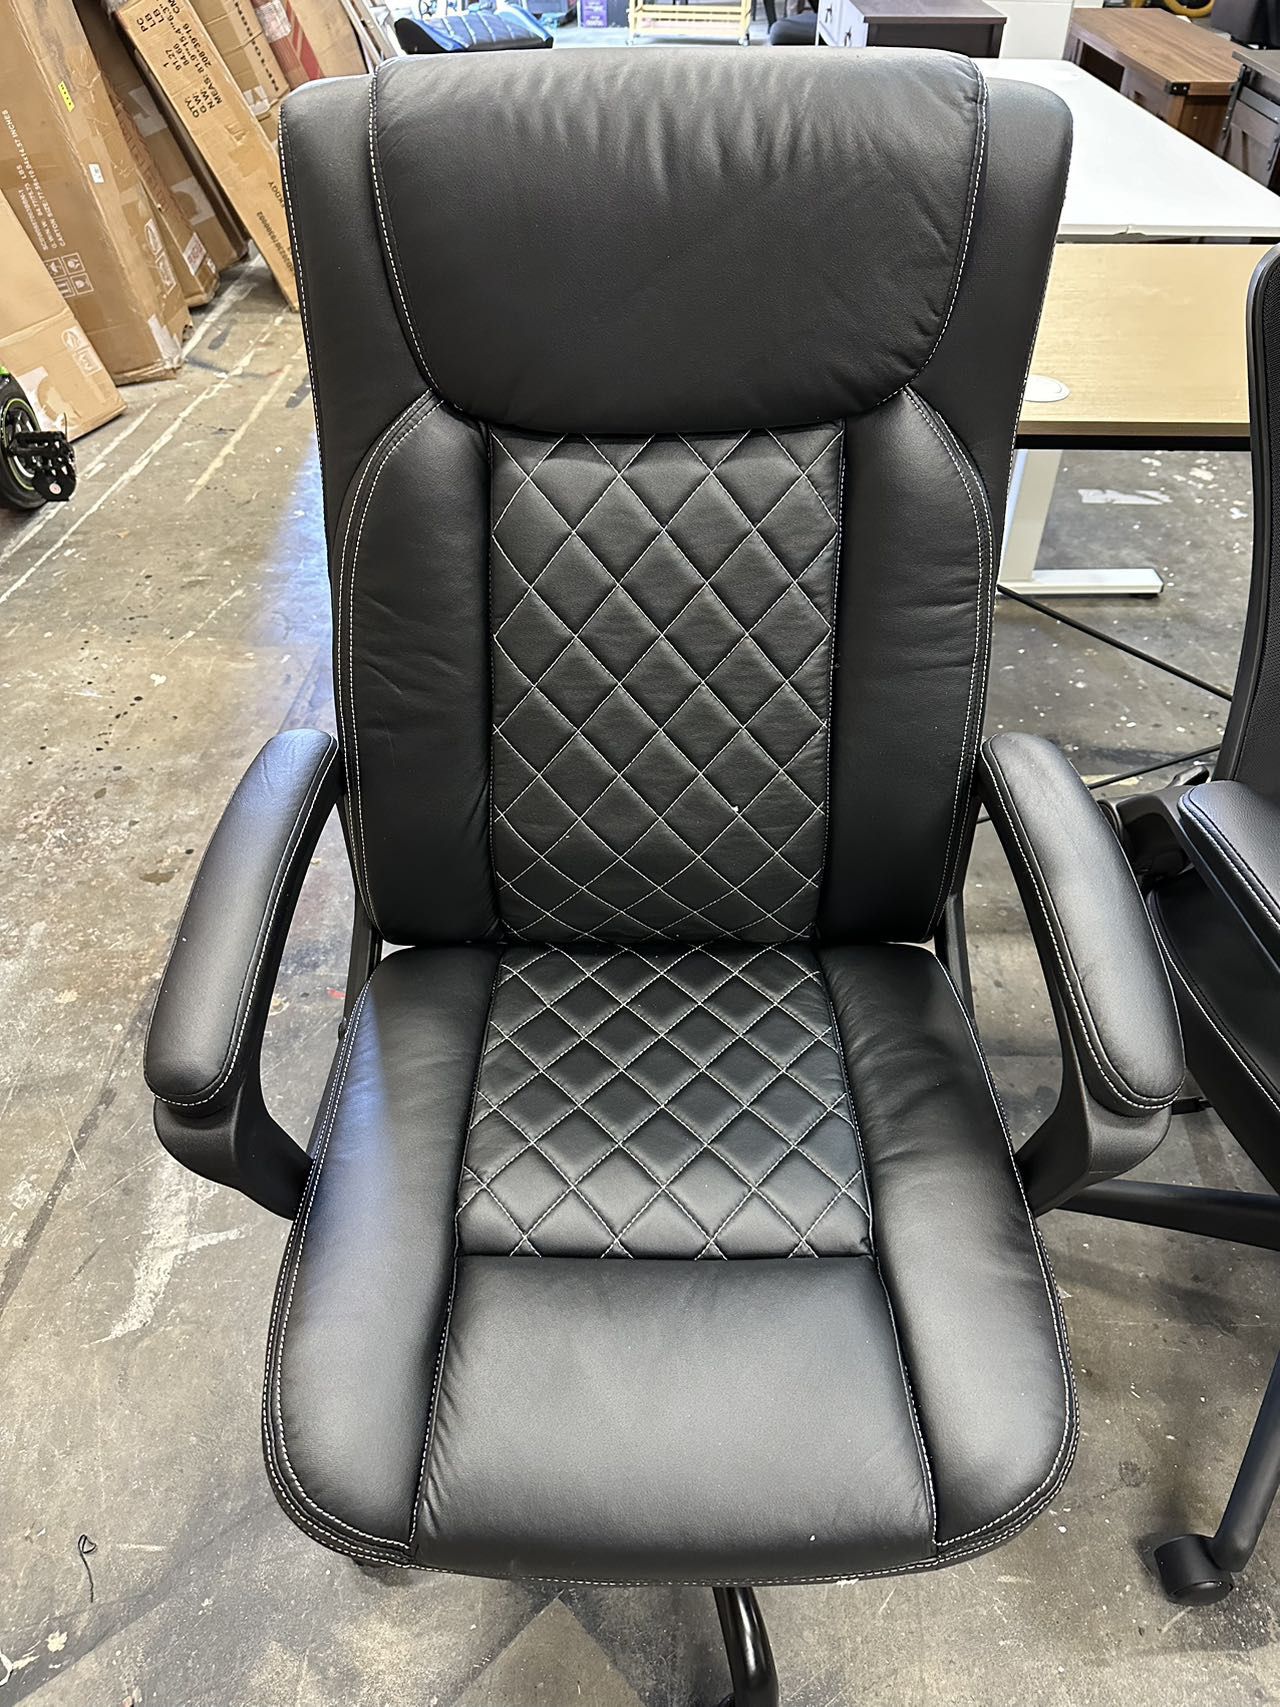 Brand new home office chair